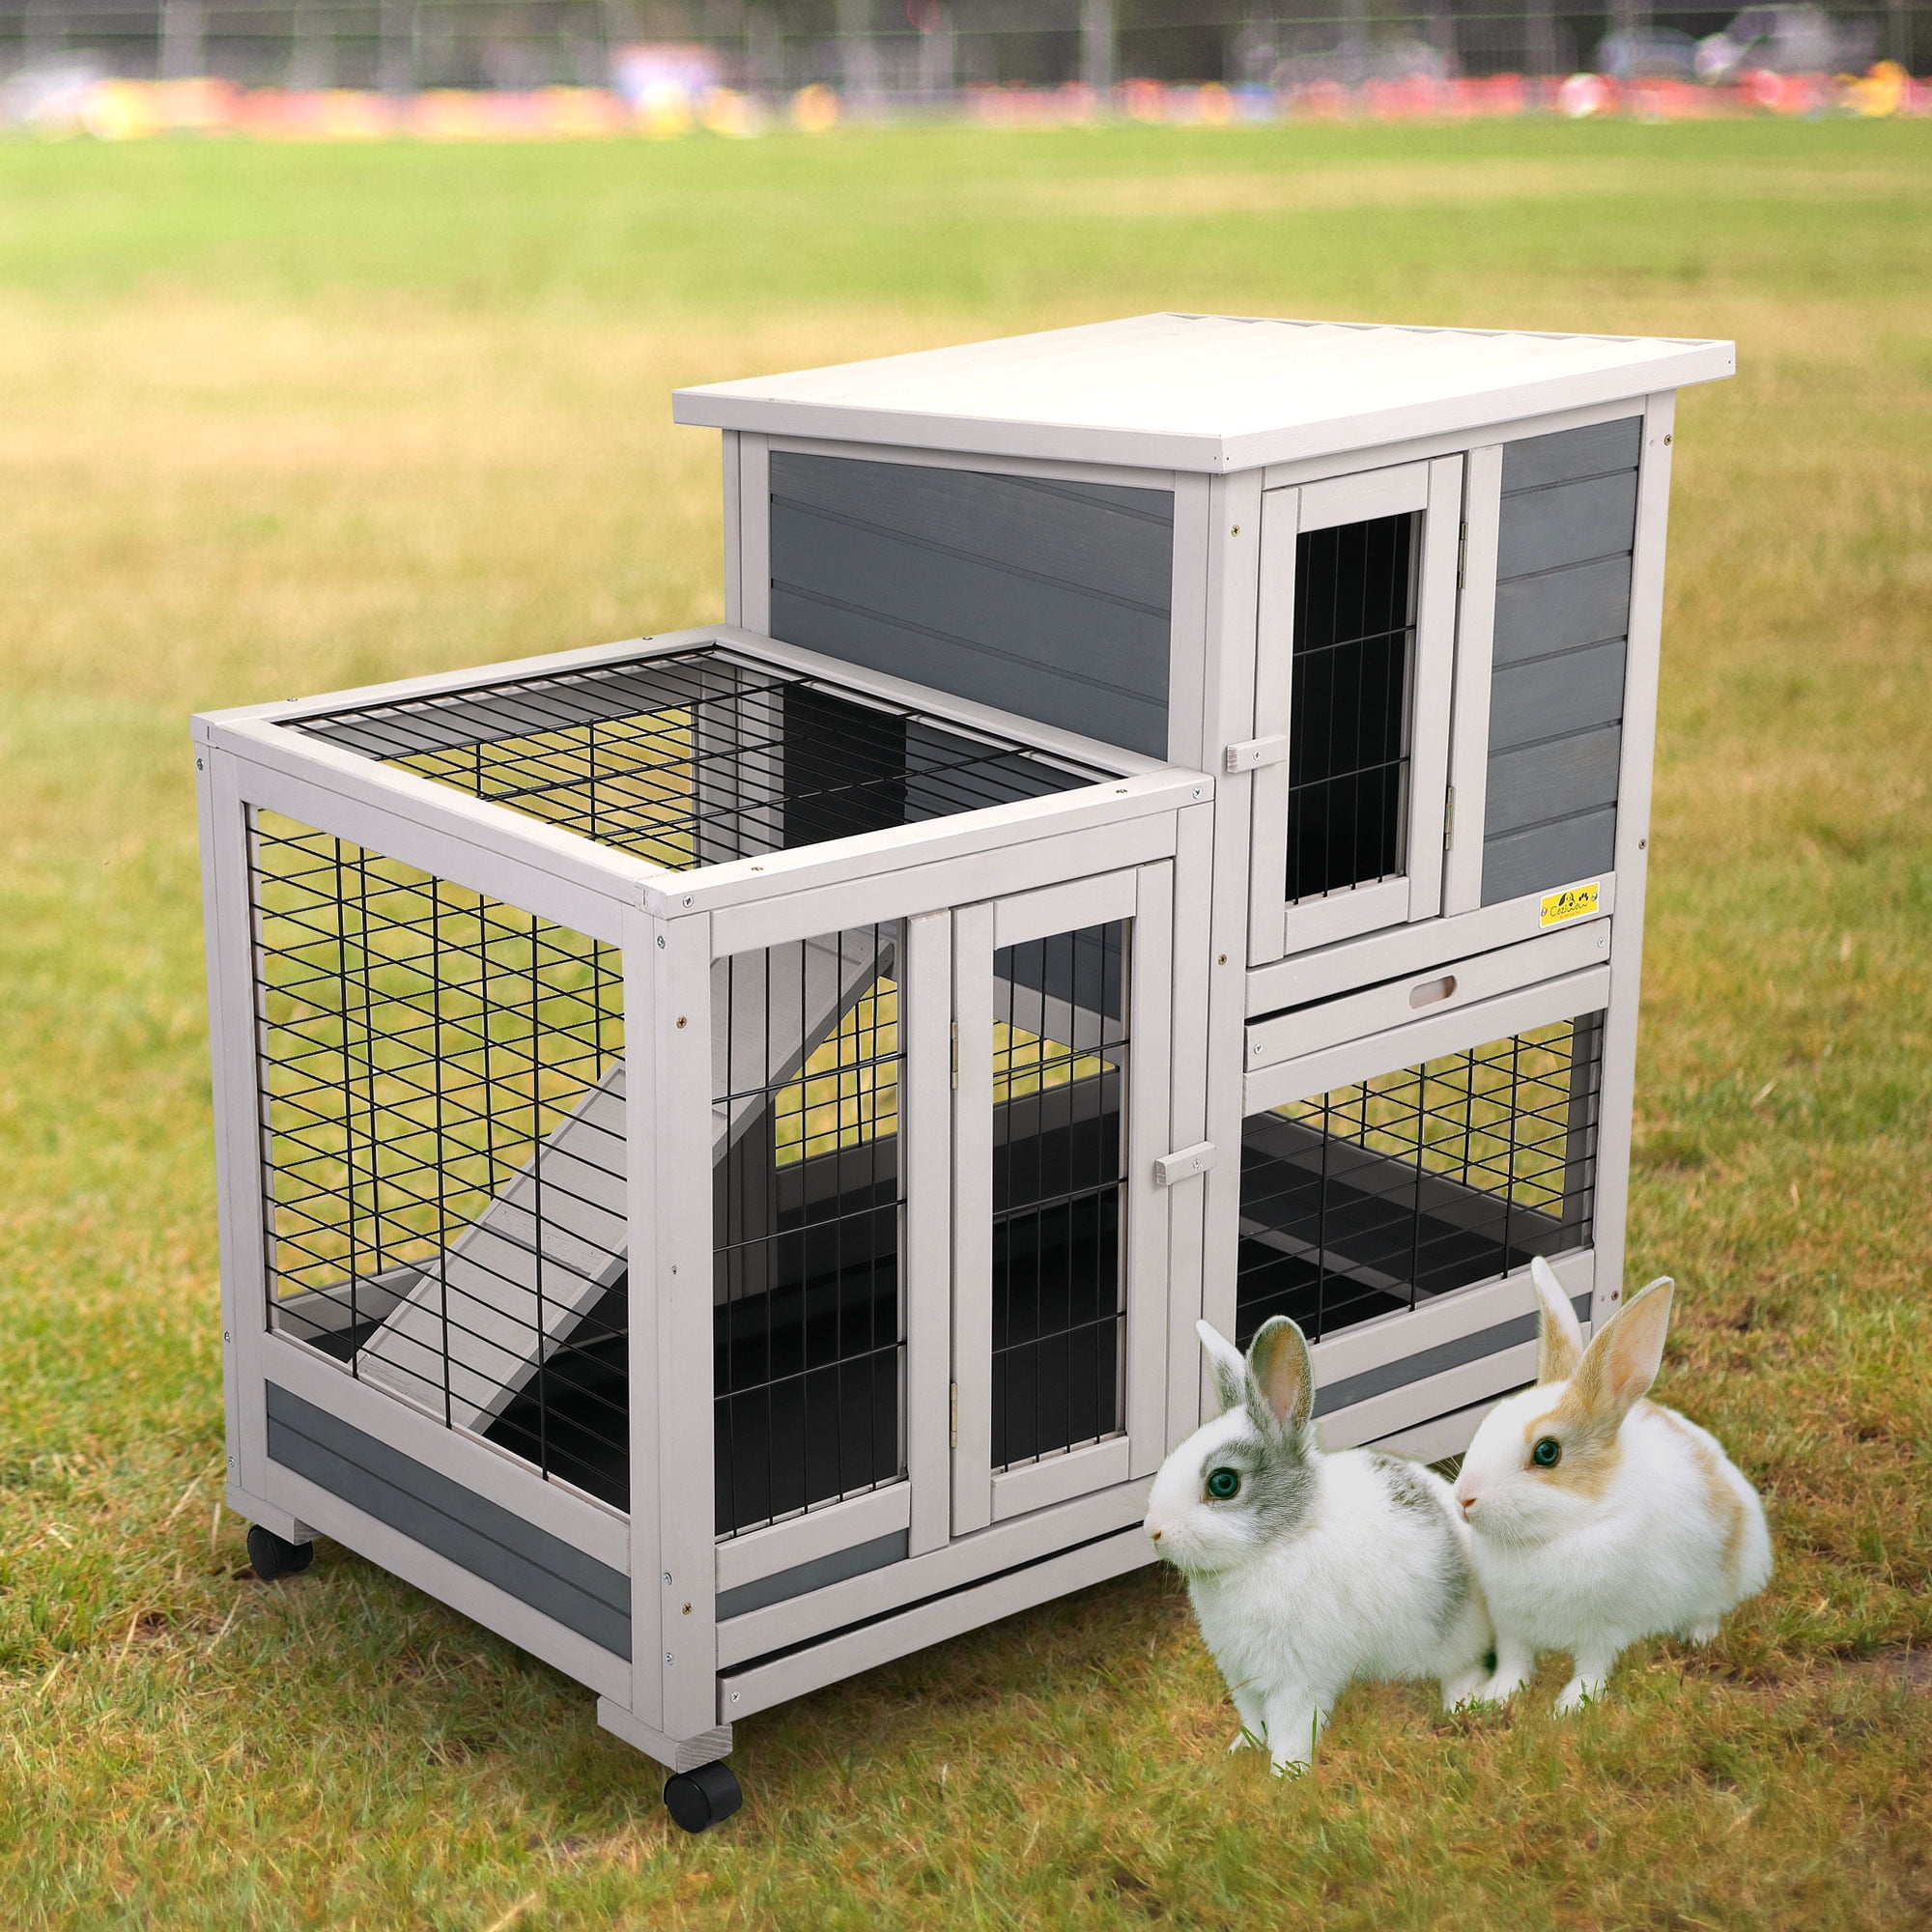 Coziwow Rabbit Hutch Outdoor Wooden Pet Bunny House Wooden Cage with ...